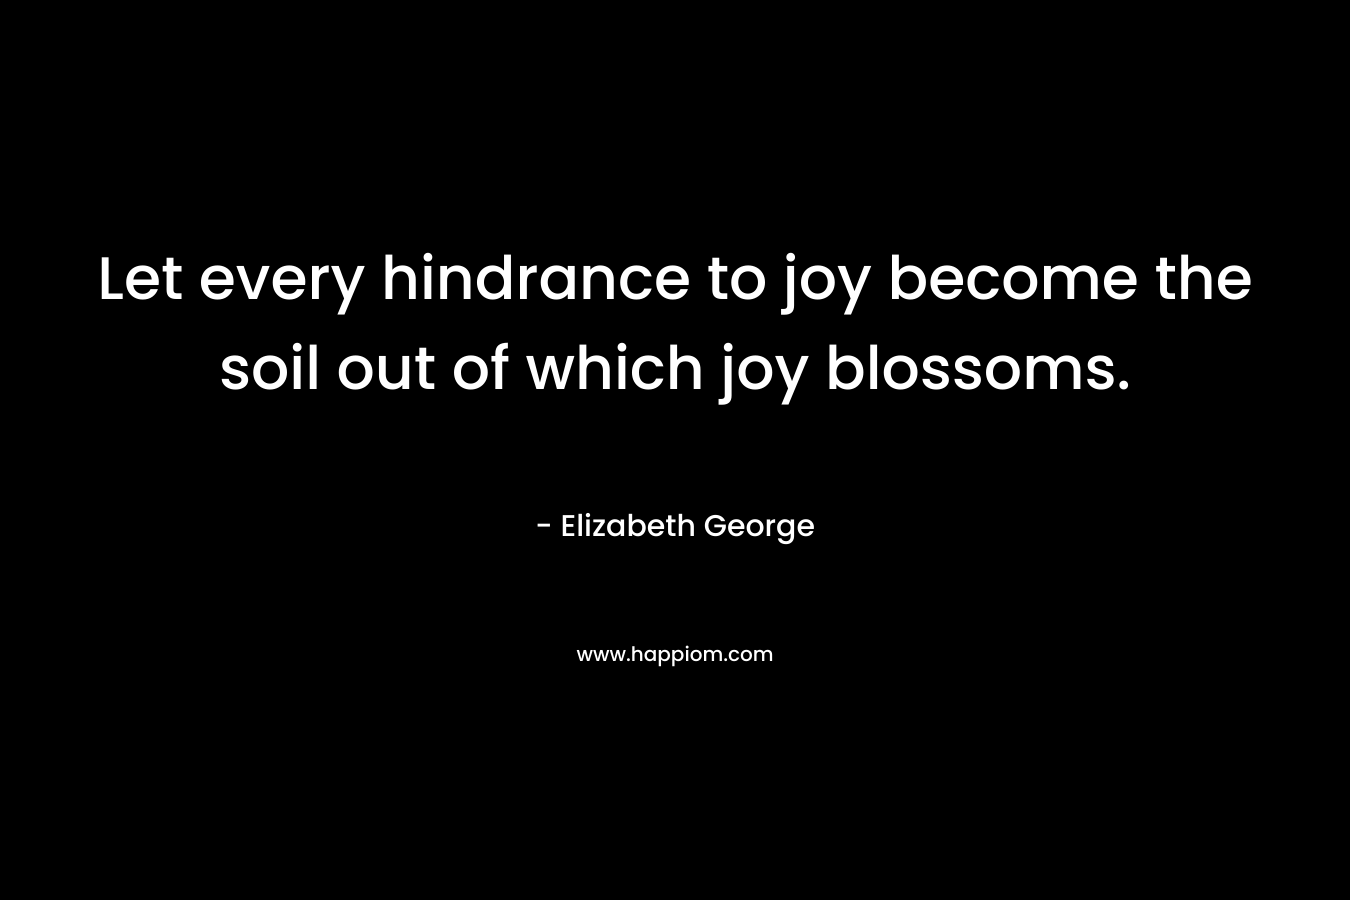 Let every hindrance to joy become the soil out of which joy blossoms. – Elizabeth George